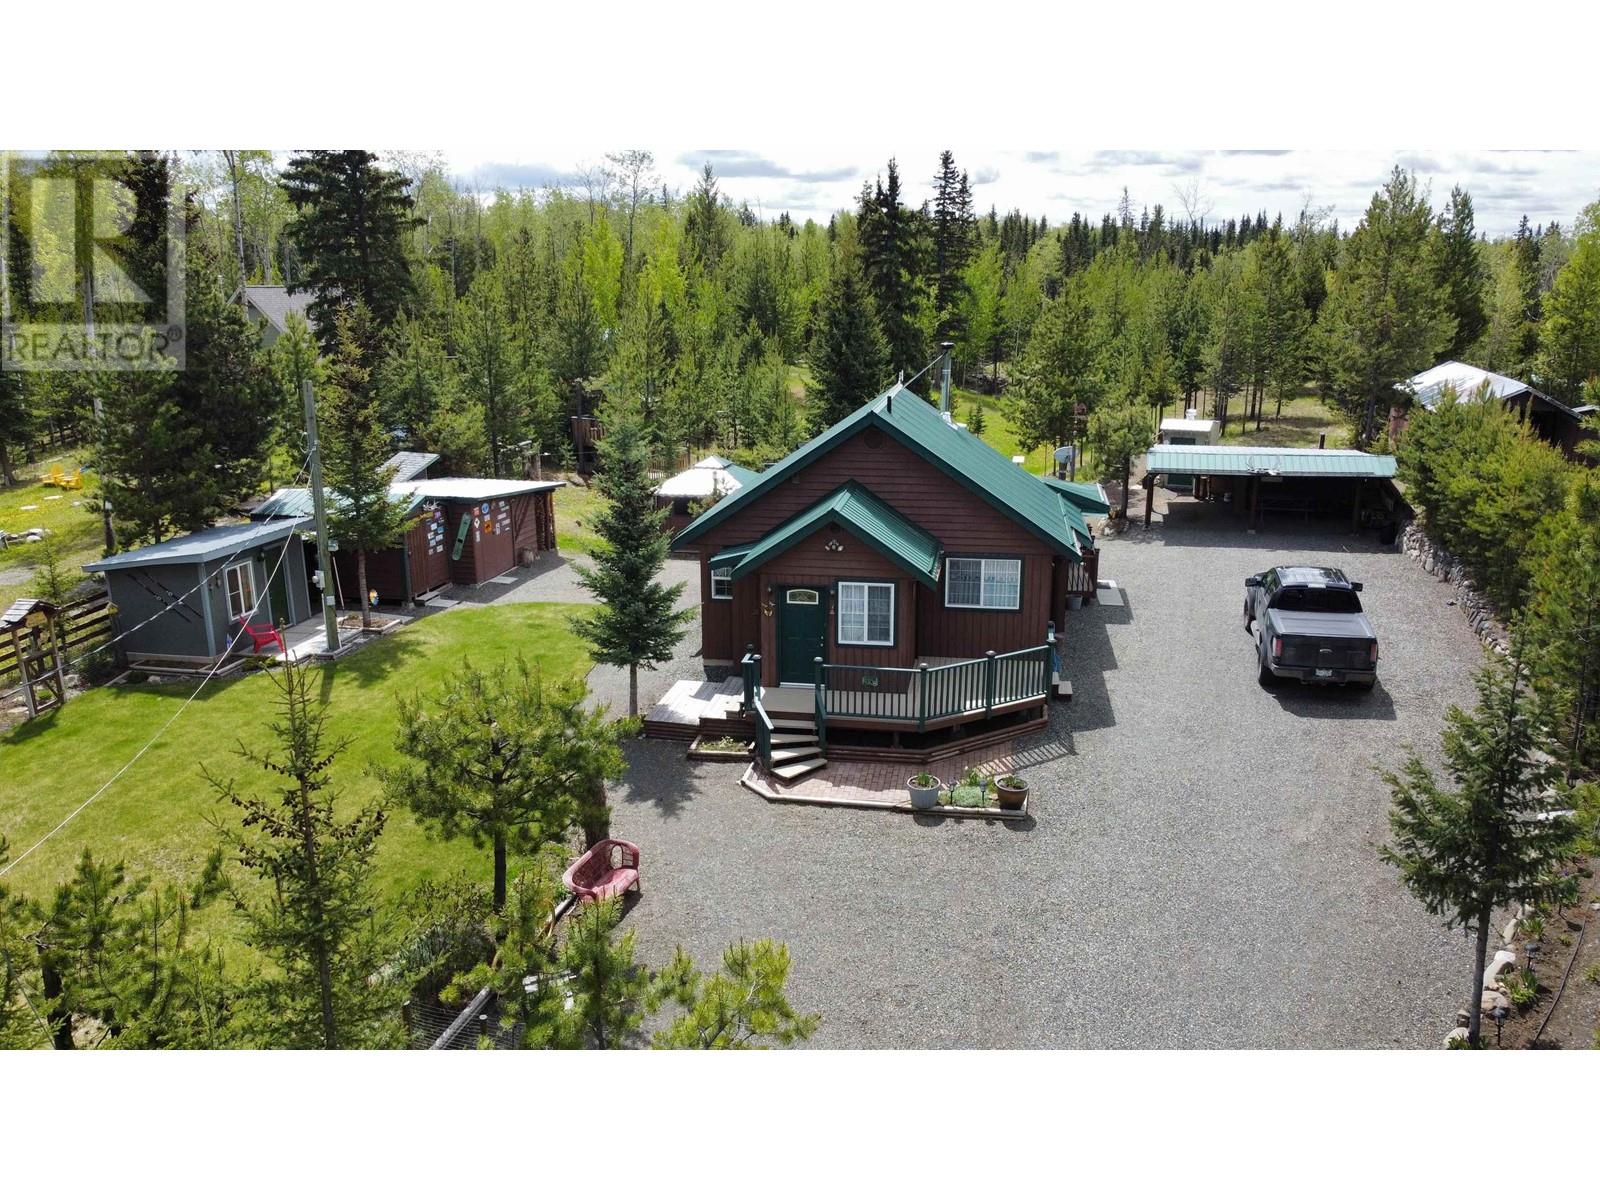 6308 MOOSE POINT DRIVE, 70 mile house, British Columbia